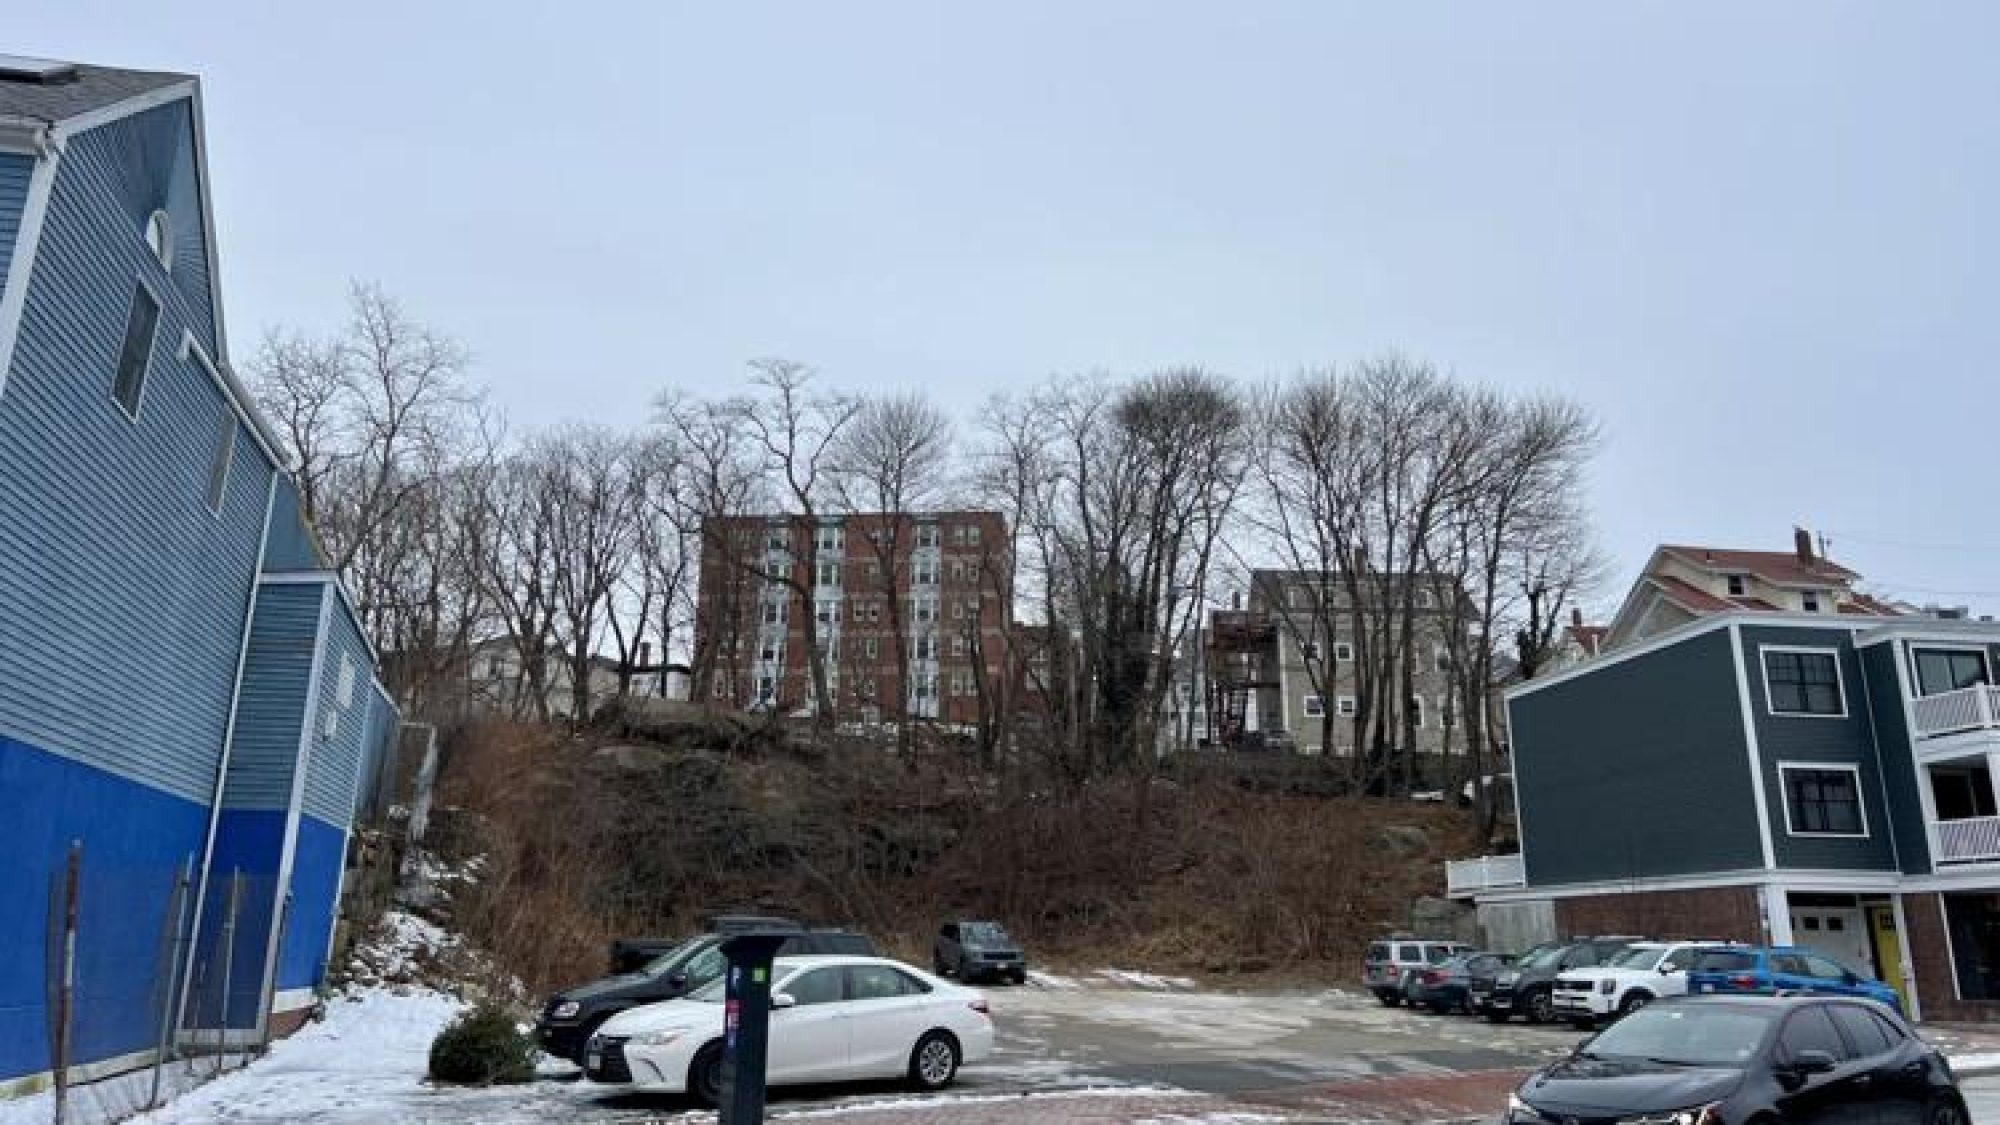 This lot at 256 Main St., owned by the Gloucester Housing Authority, could potentially become an affordable senior housing development by Harborlight Homes of Beverly as the Gloucester Affordable Housing Trust seeks to fund such projects with ARPA money